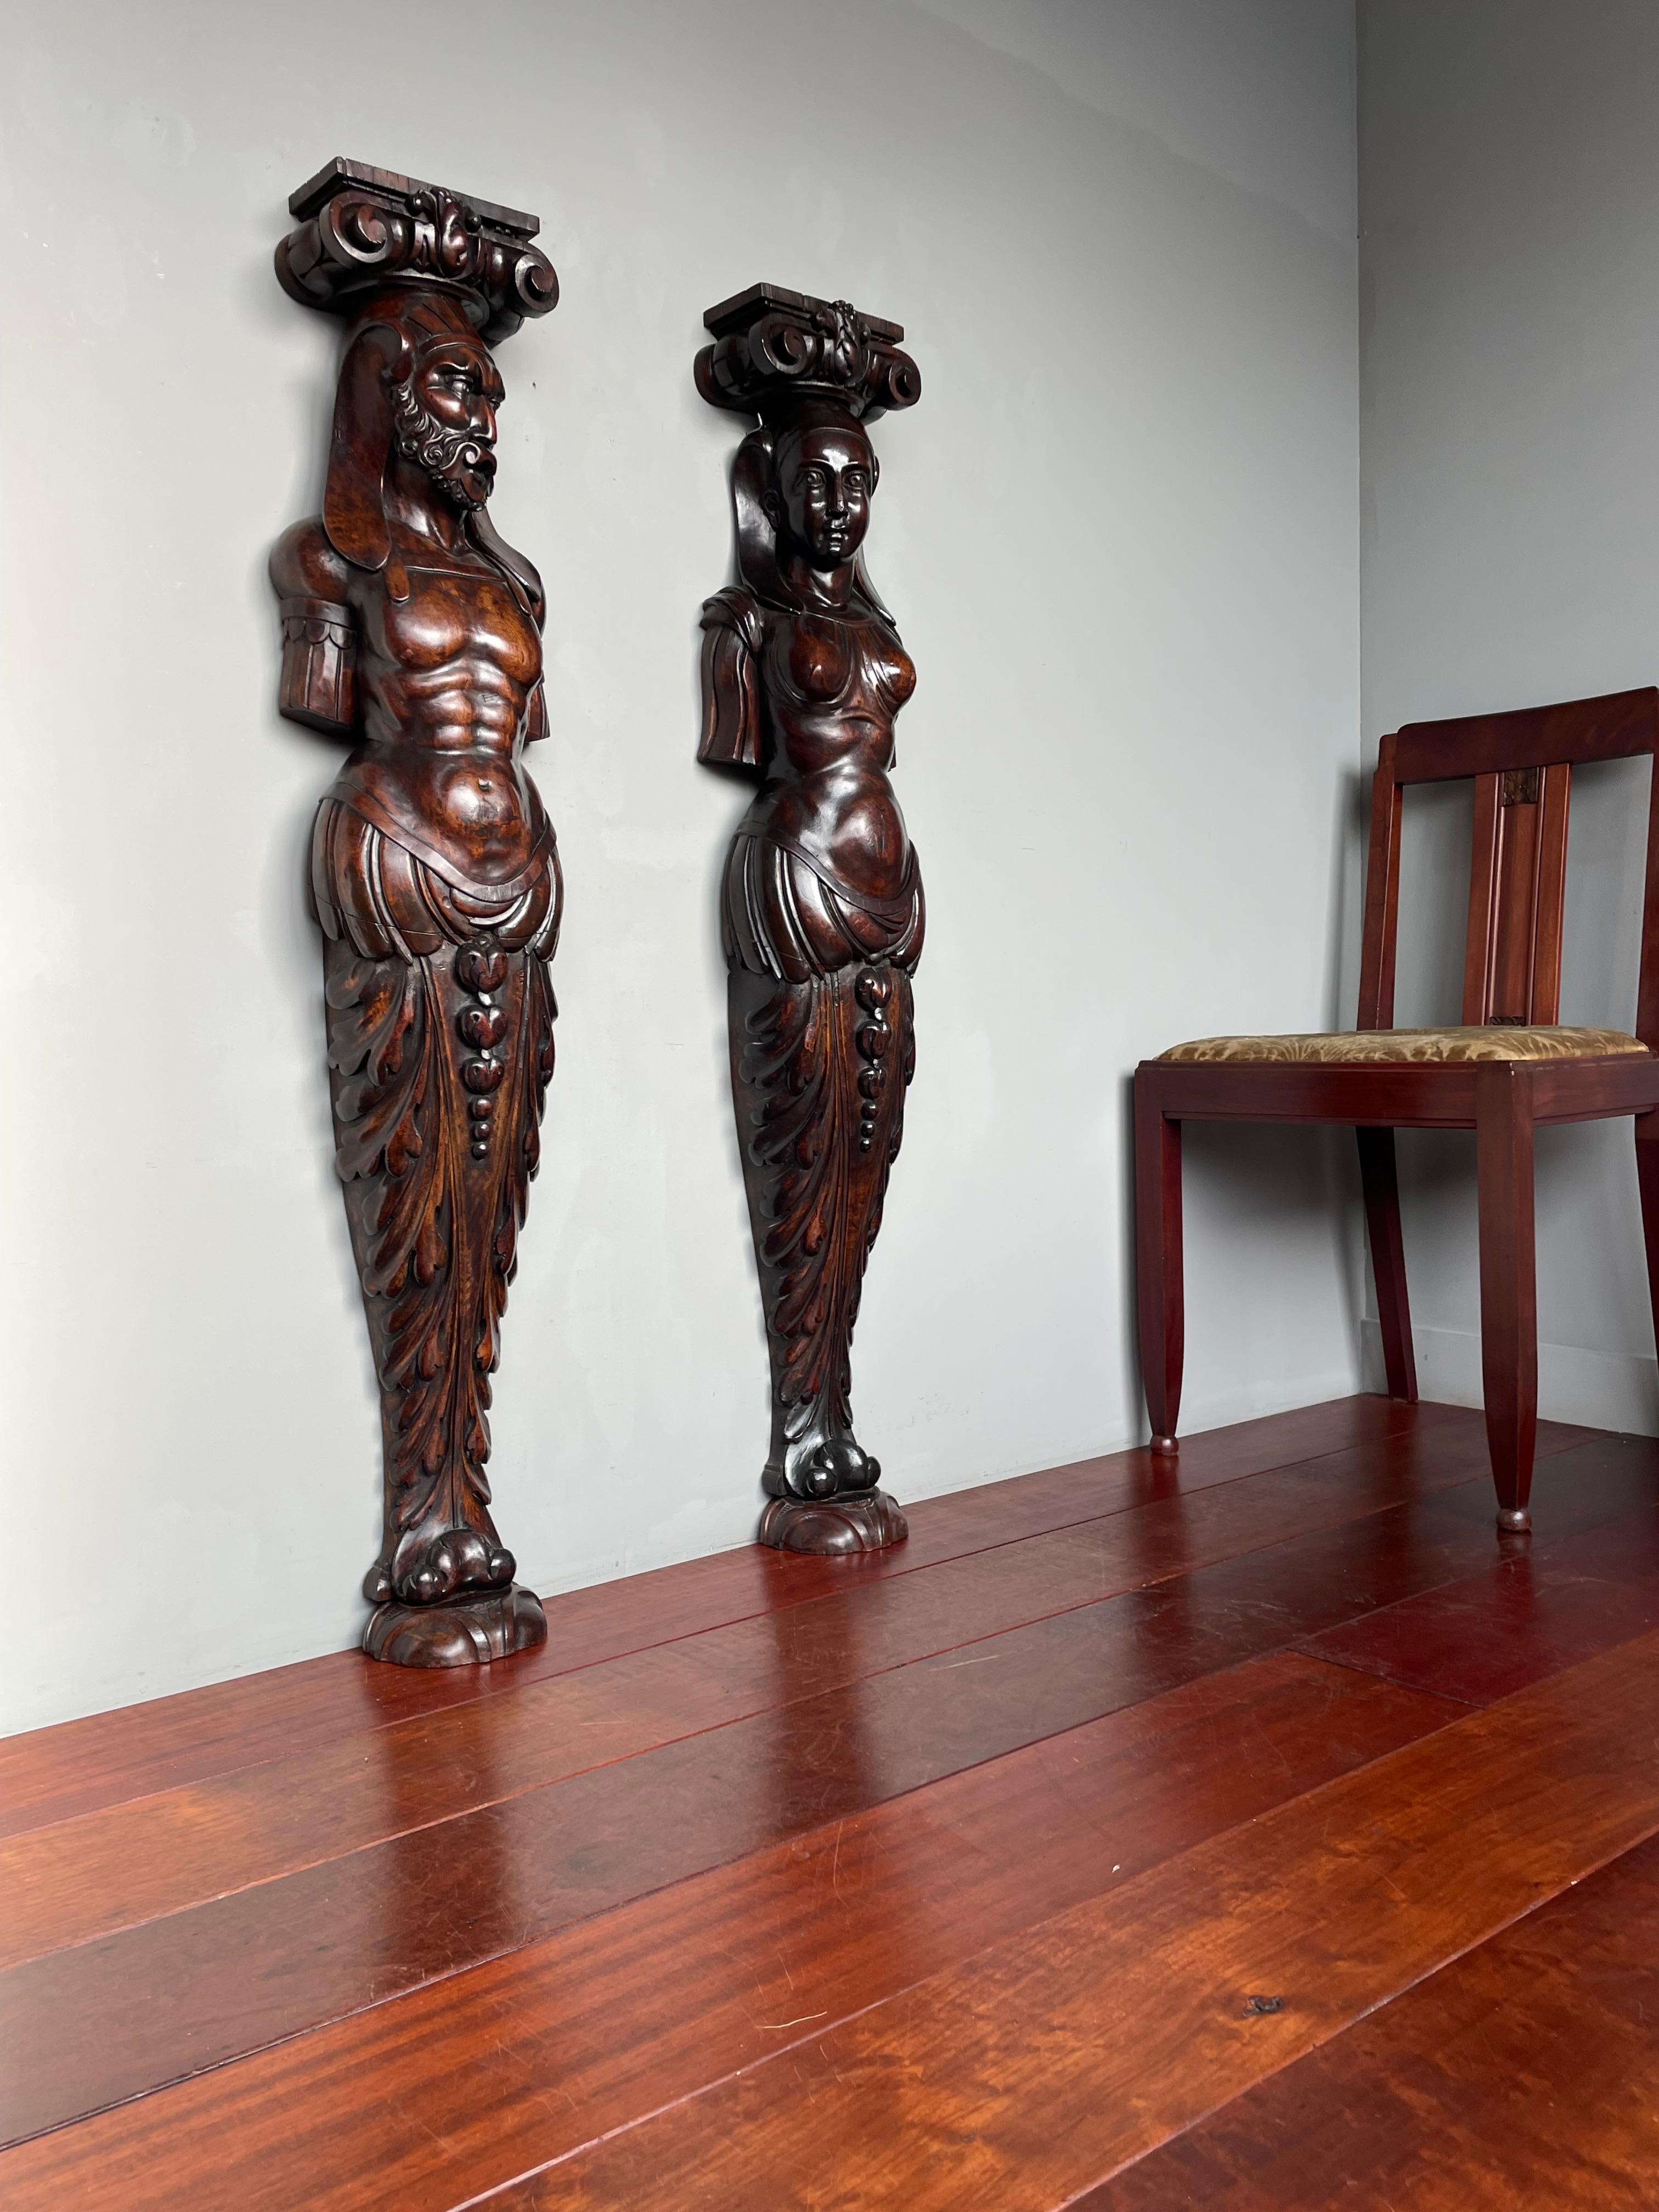 Stunning and almost 4 feet tall, Egyptian Revival wall sculptures.

This rare and striking pair of hand carved Egyptian sculptures is another great example of the quality of the craftsmanship of European artisans around the 1870s. Only the most